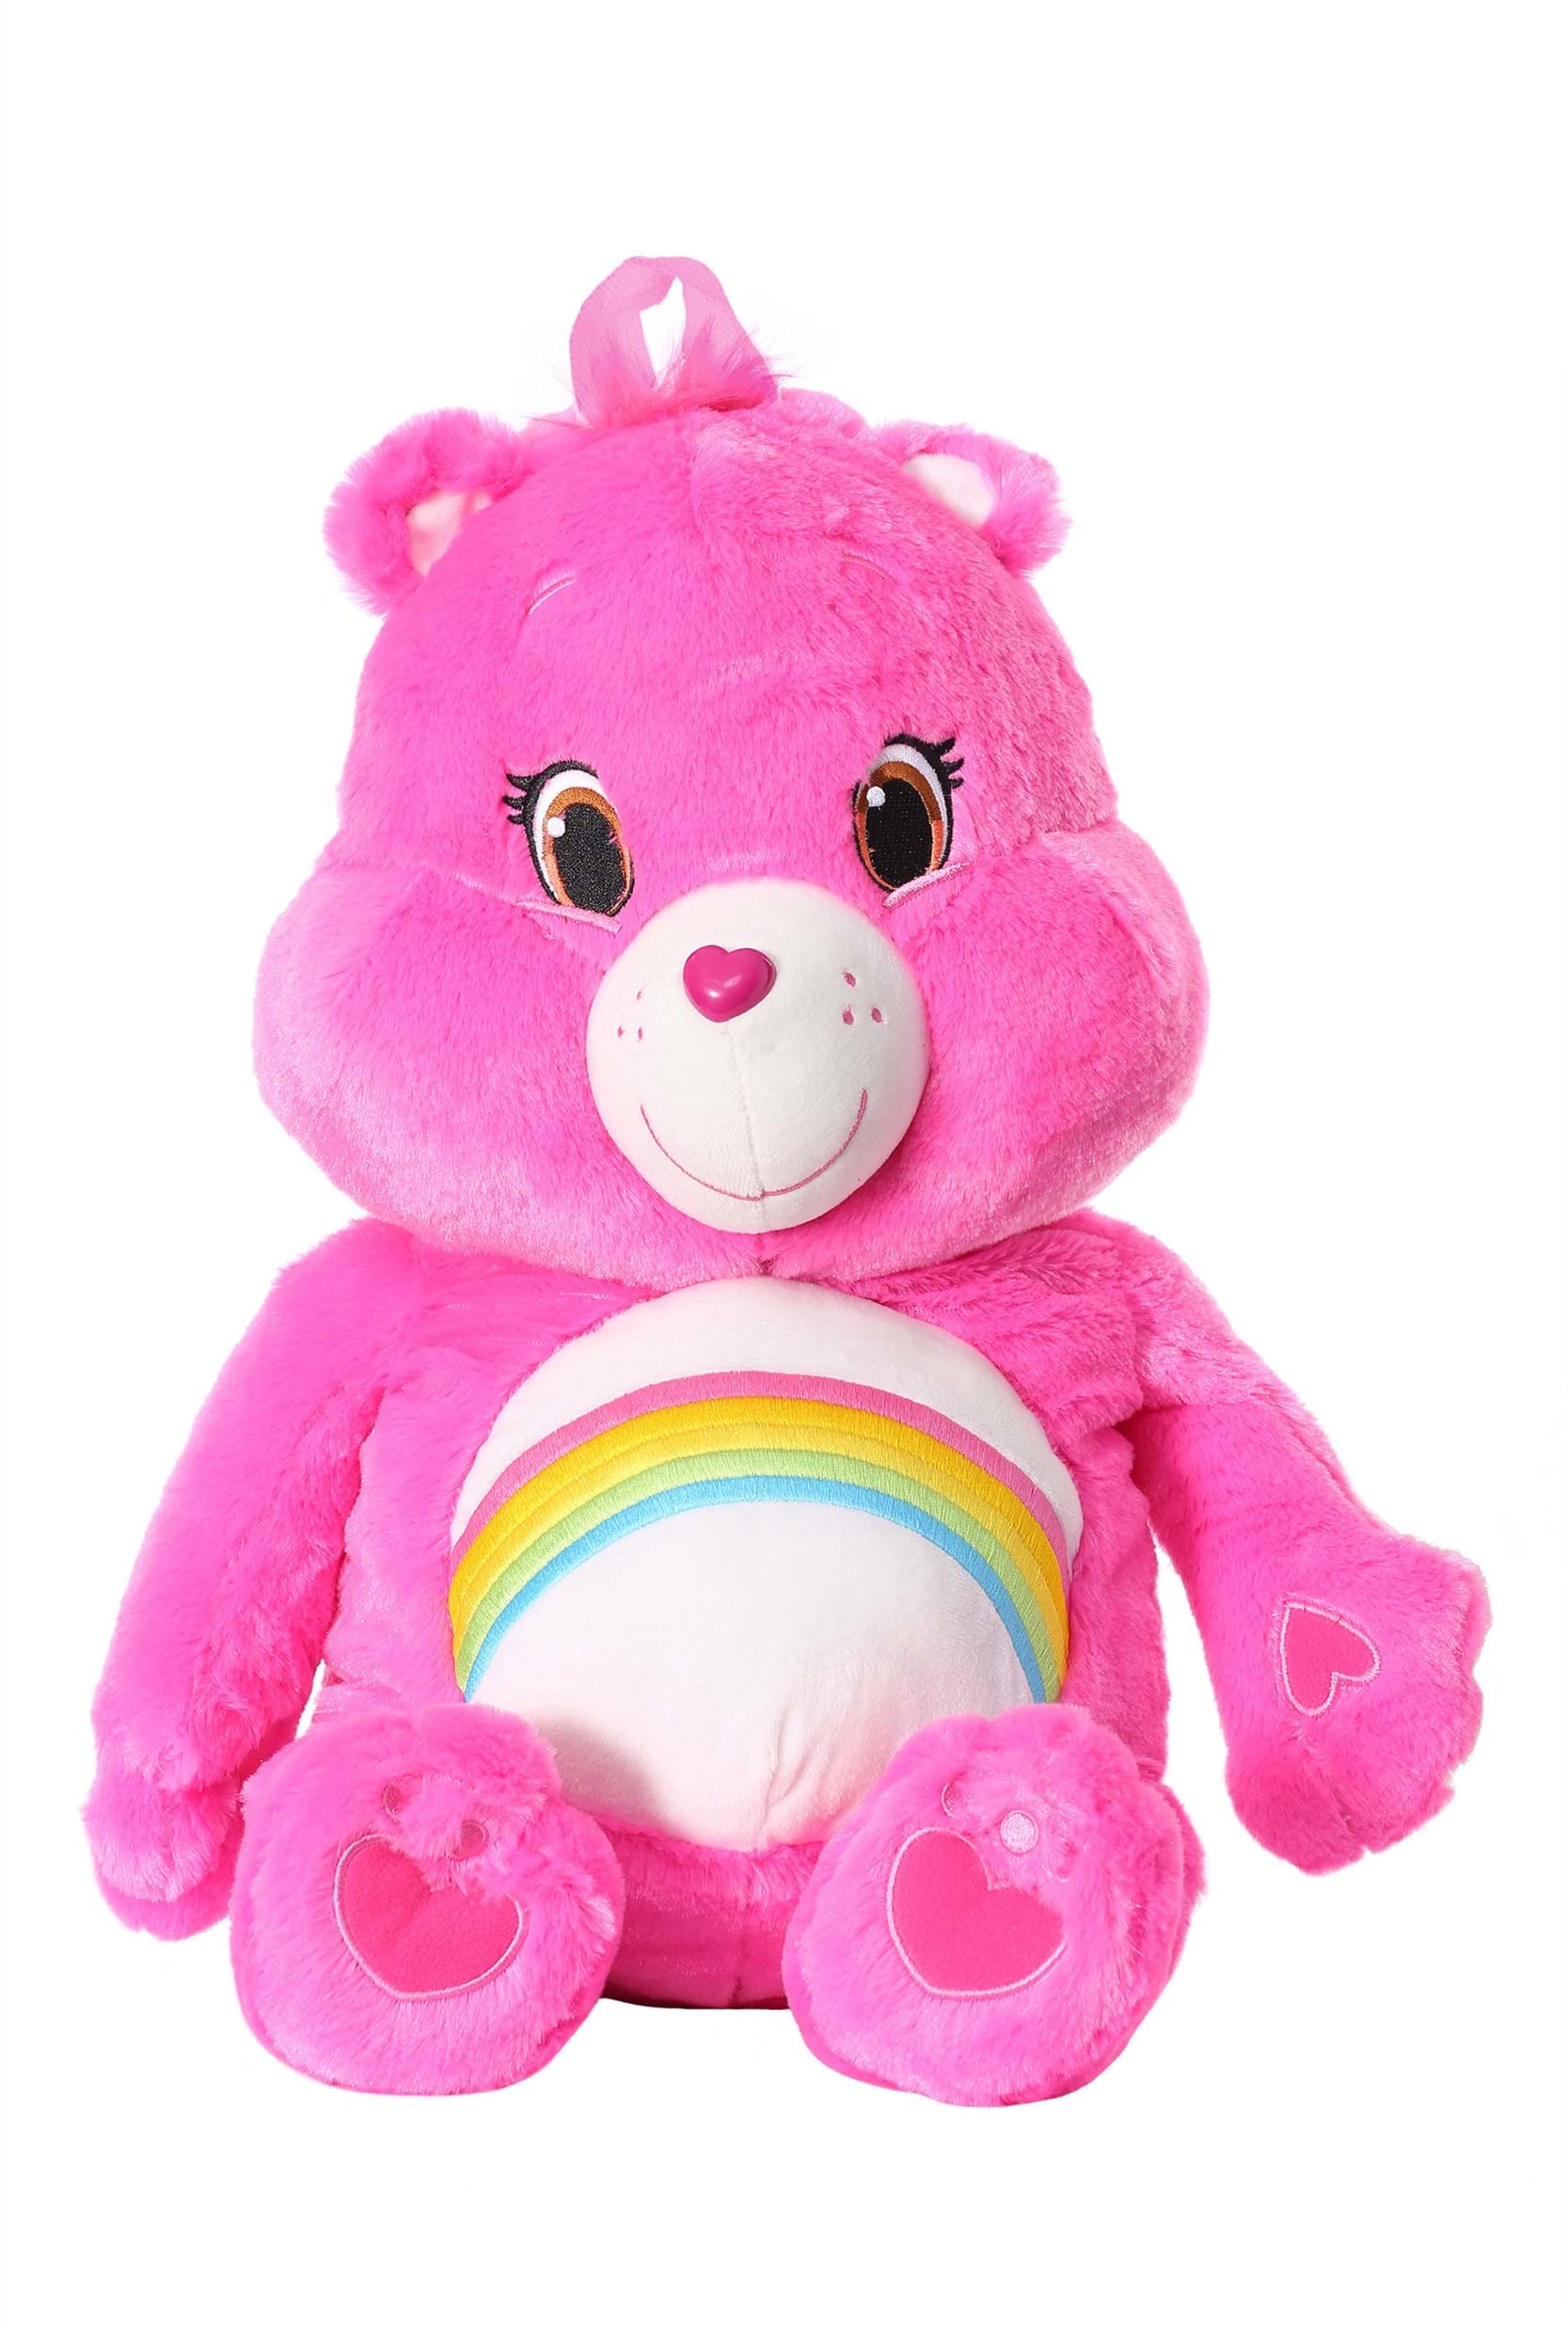 Care Bears Cheer Bear School Backpack 16" Large Pink Plush Bag with Ear 